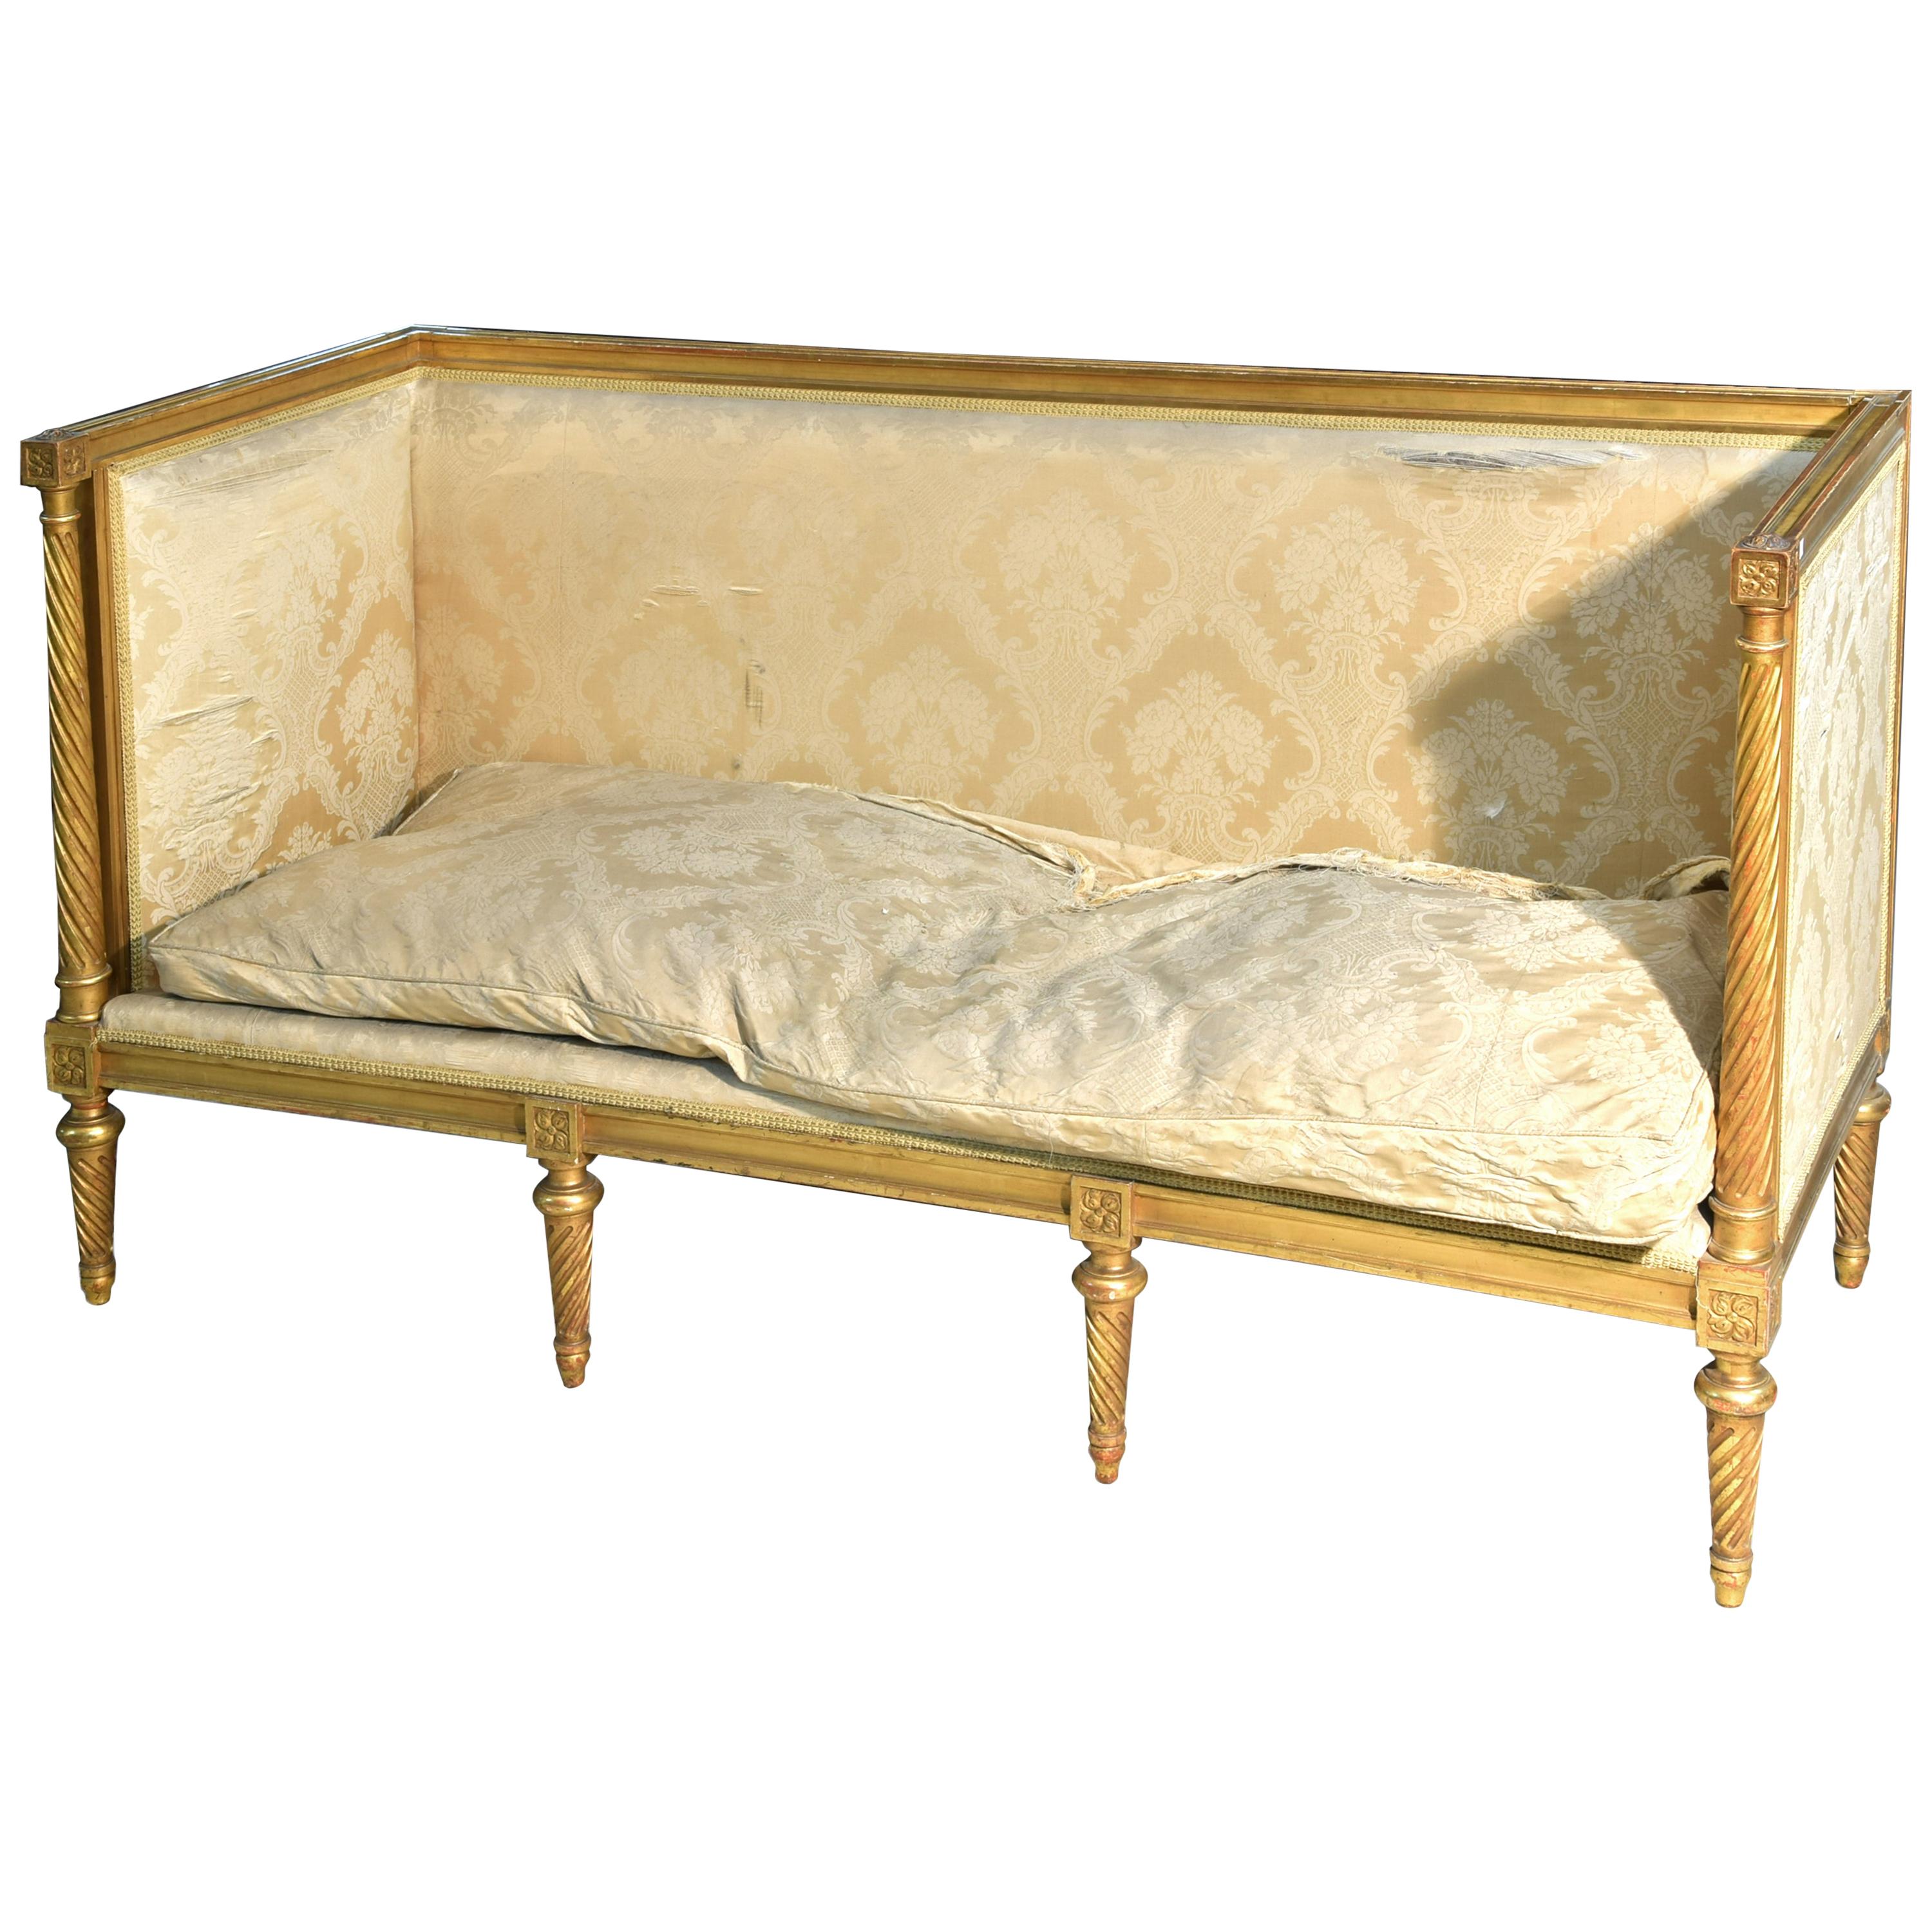 Louis XVI Settee or Sofa, Golden Wood, 19th Century For Sale